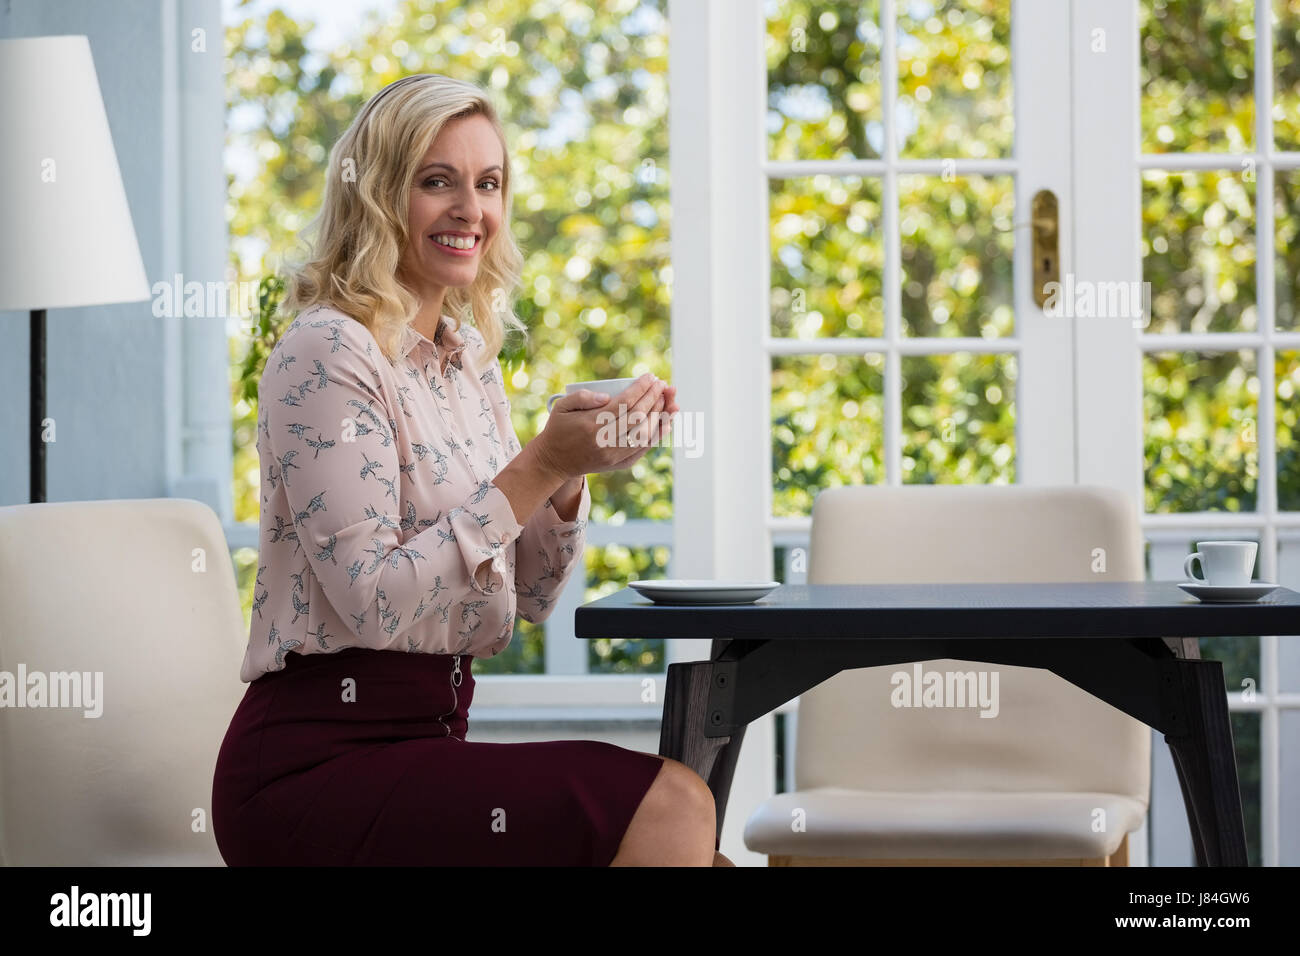 Portrait of smiling businesswoman holding Coffee cup in cafe Banque D'Images